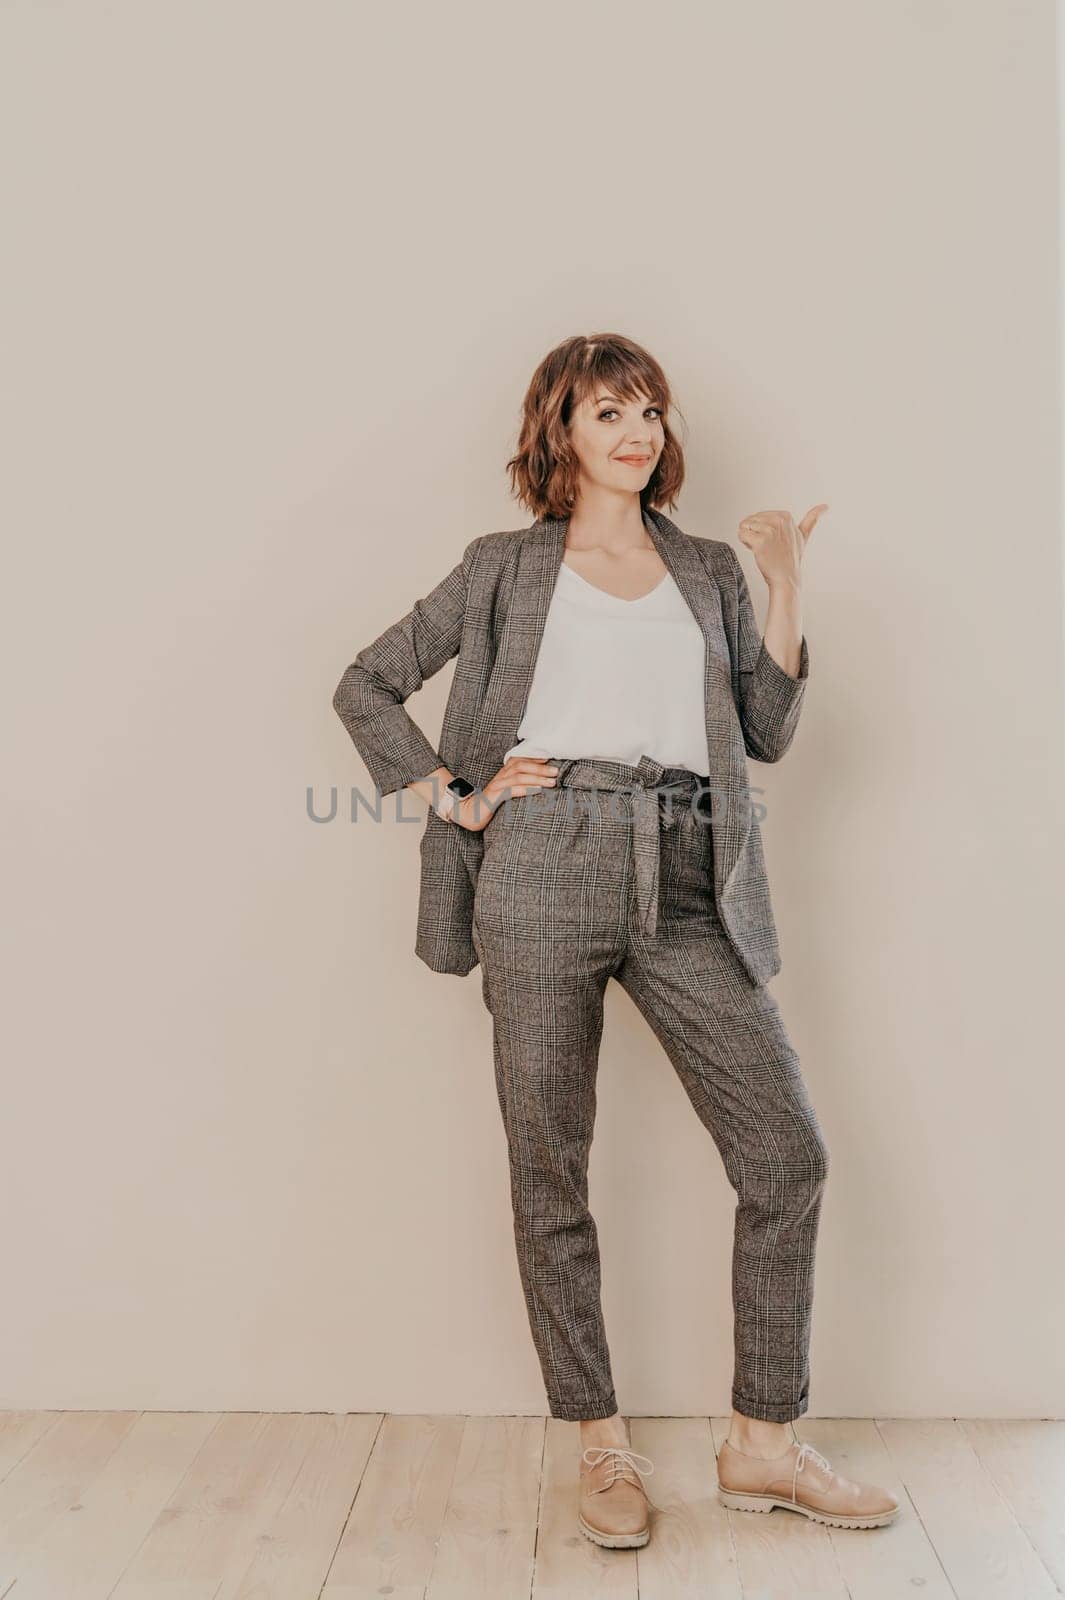 Brunette suit wall. Business woman in a beige suit posing on a beige background. Full length studio portrait. by Matiunina